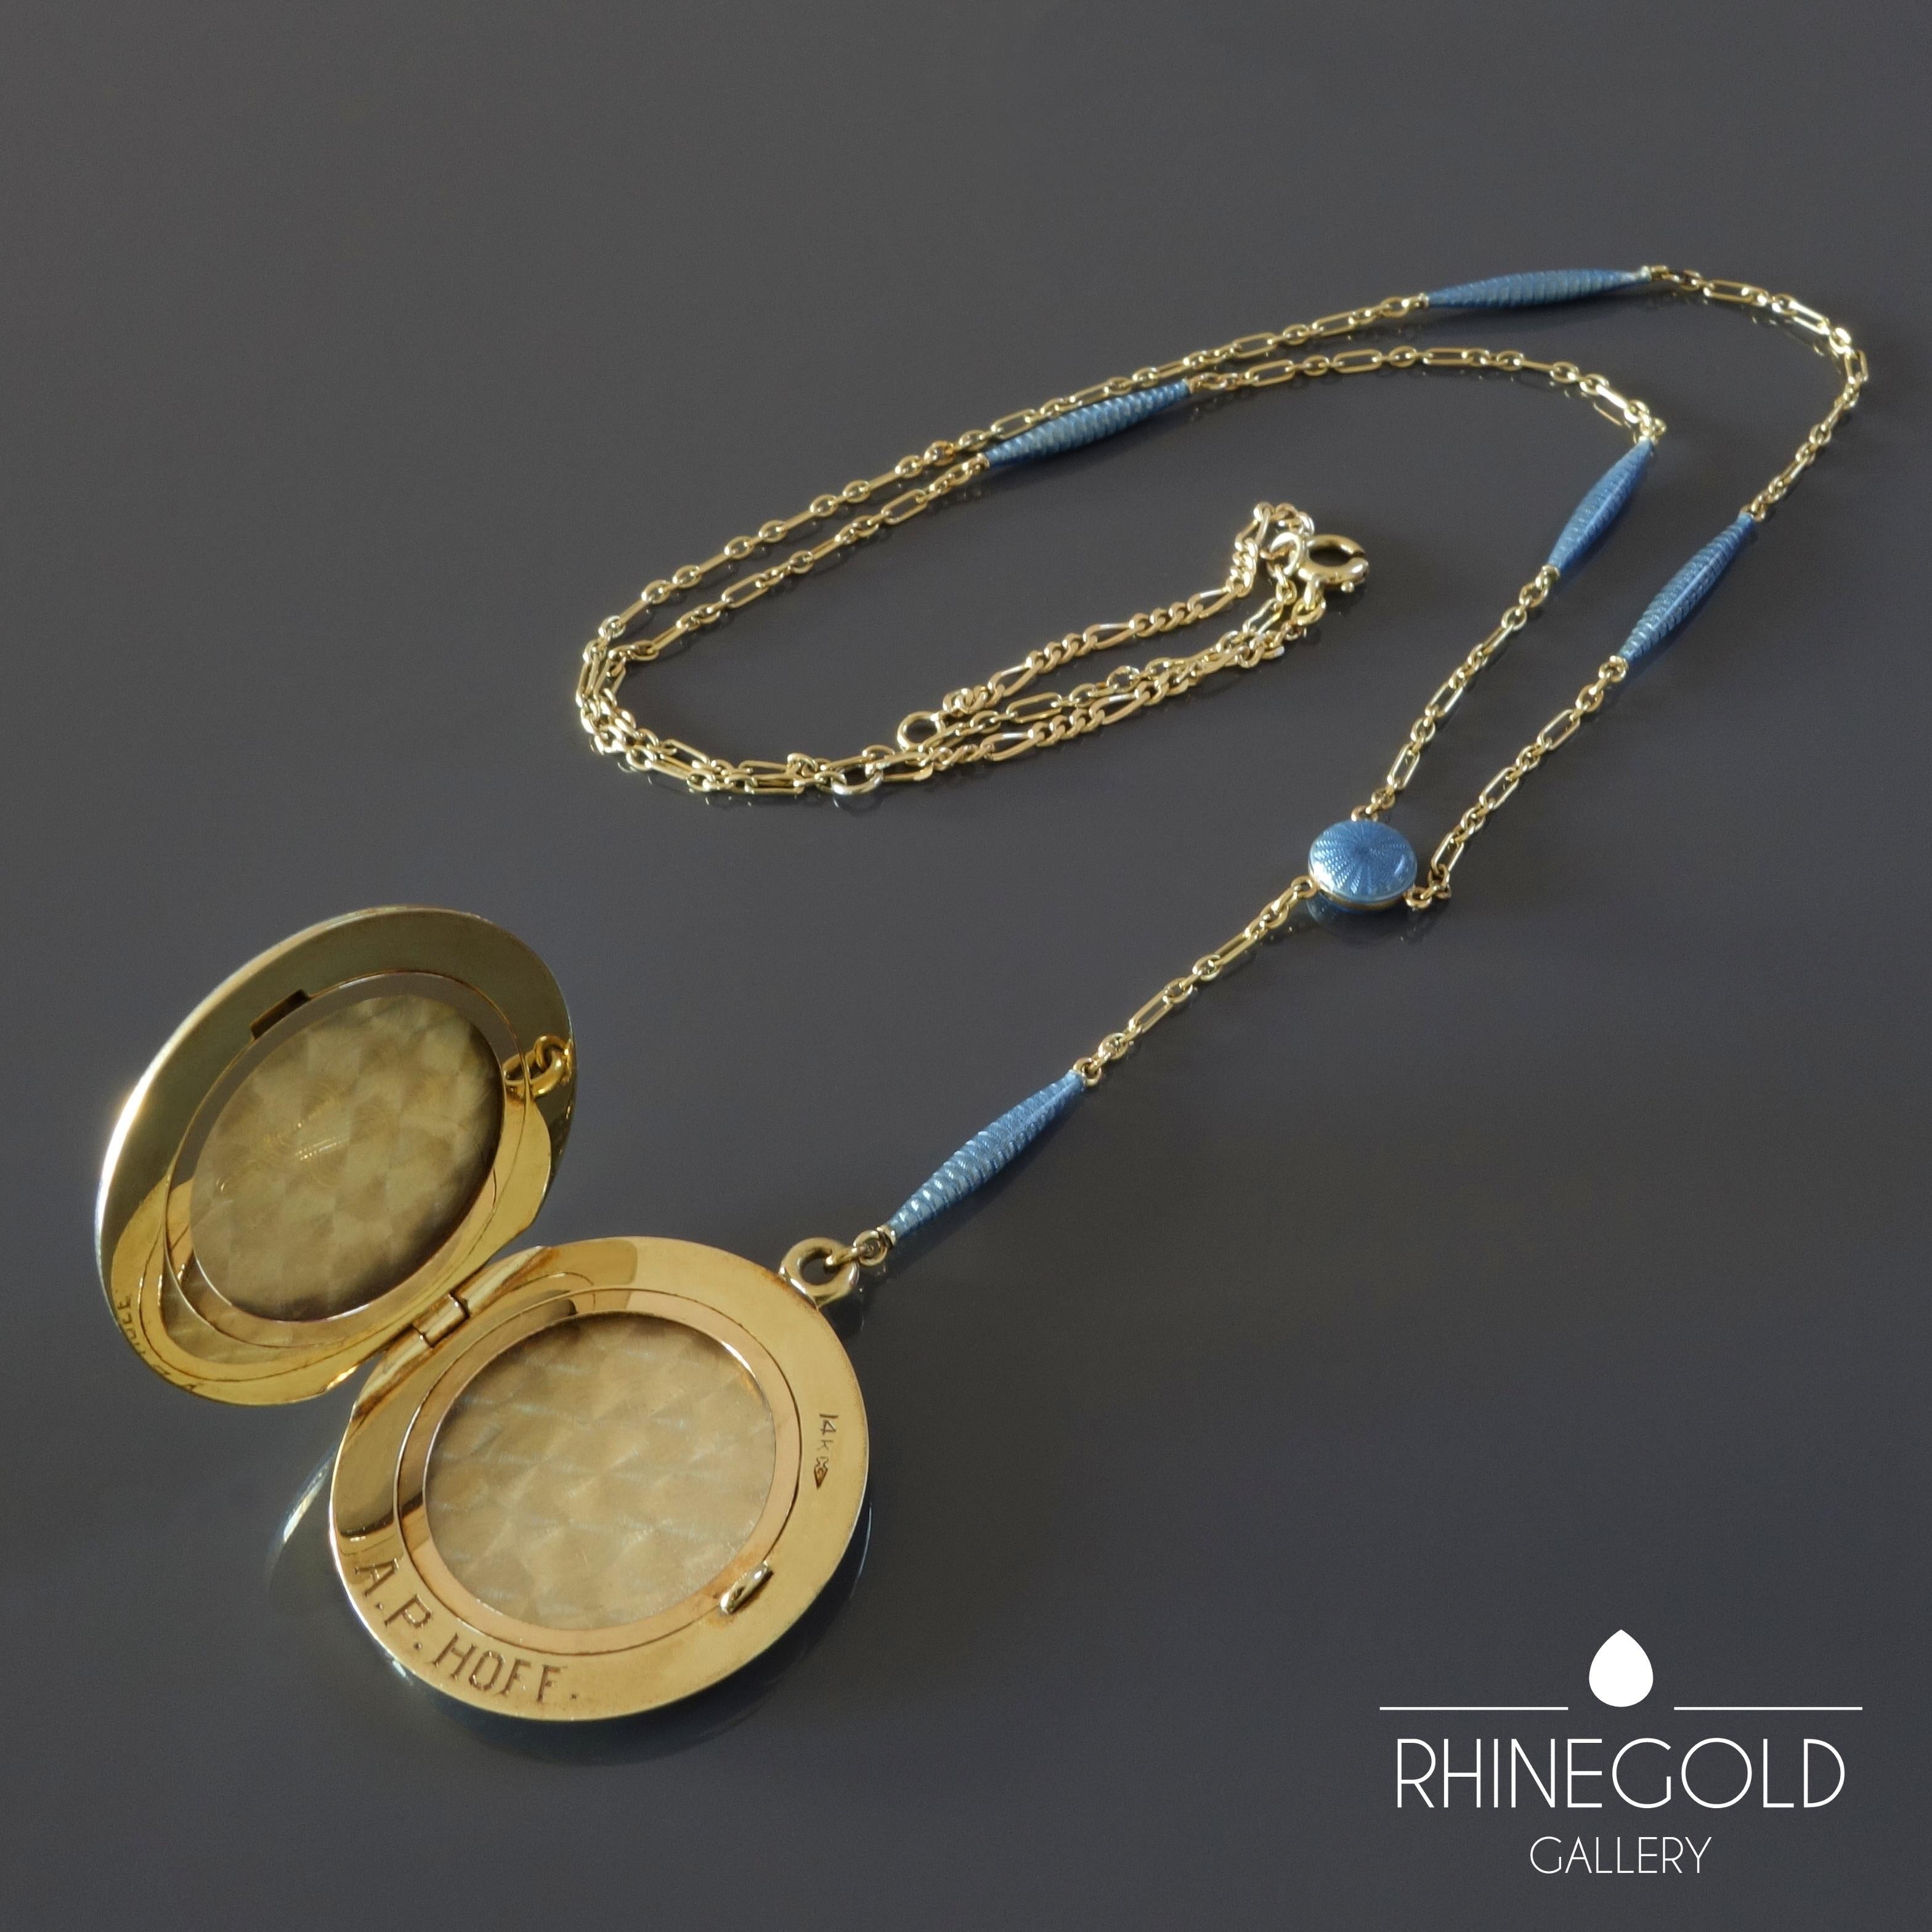 Antique Late Victorian Edwardian Blue Guilloche Enamel Gold Locket 
14k yellow gold, guilloche enamel 
Diameter of locket 2.7 cm (approx. 1 1/16”)
Chain adjustable at 43 cm and 47.5 cm (approx. 16 7/8“ and 18 11/16”)
Weight approx. 17 grams
Marks: